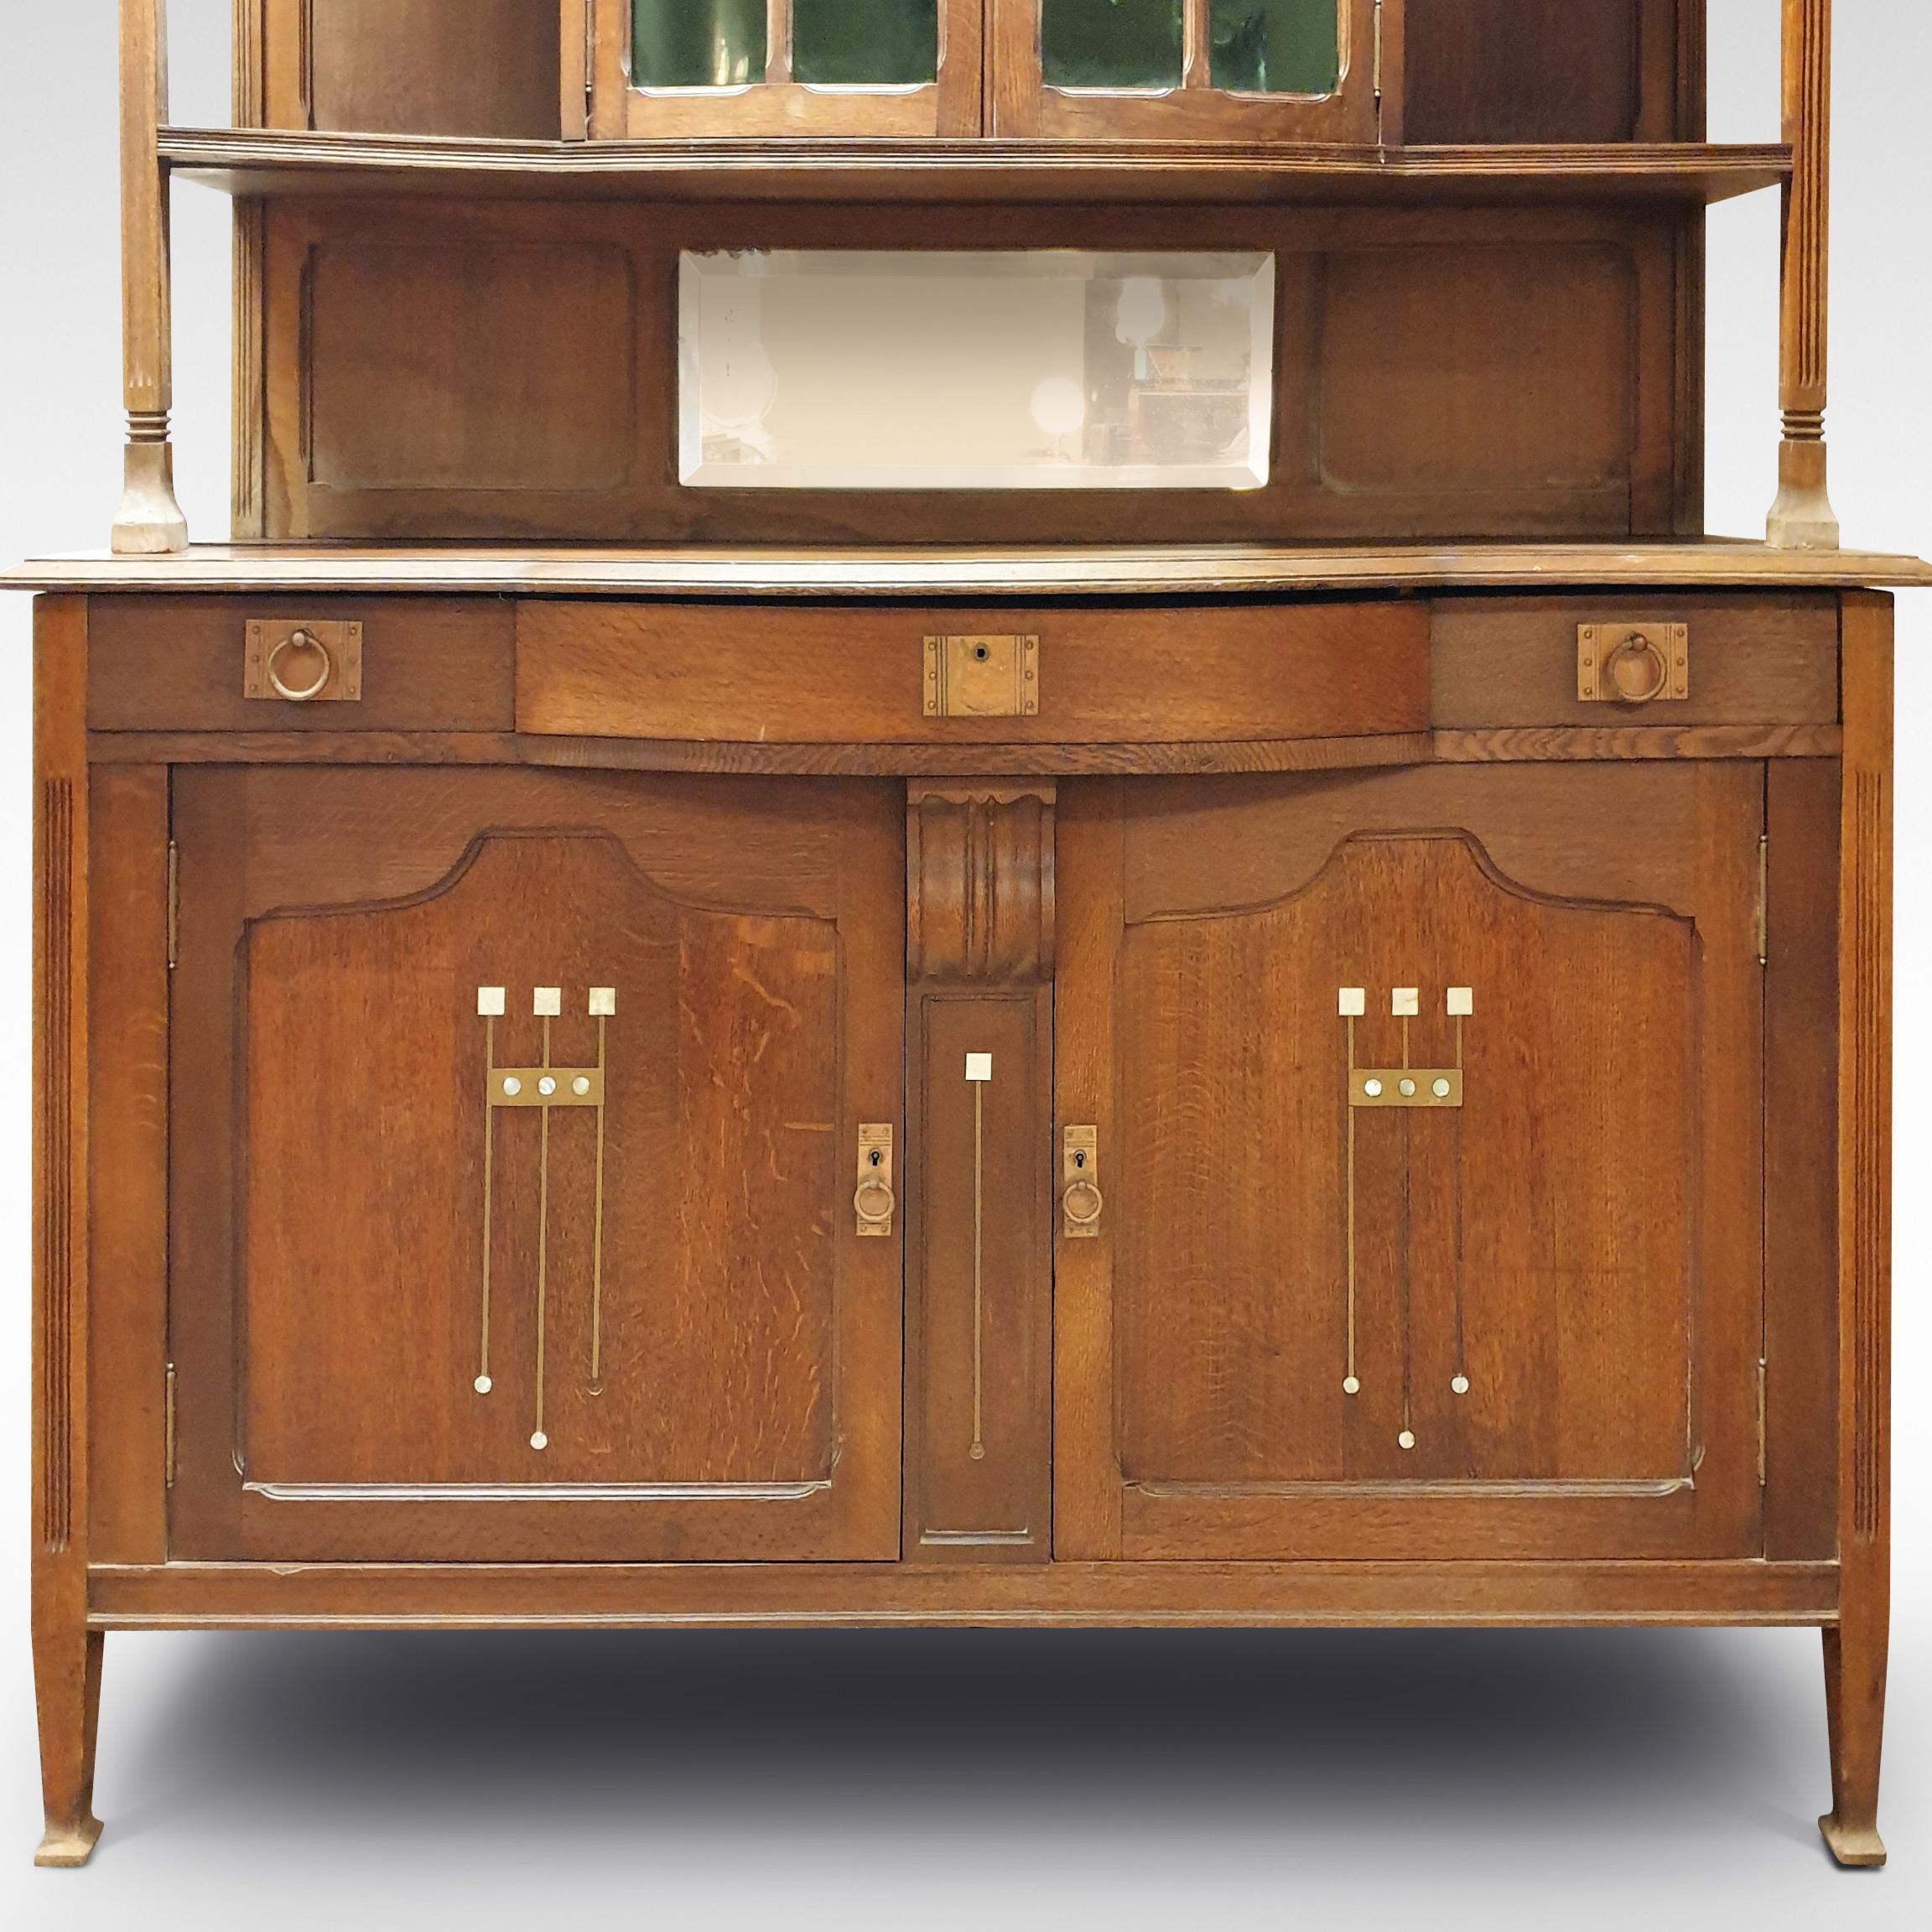 Vienna Secession Arts & Crafts Movement Oak Sideboard in the Secessionist Style For Sale